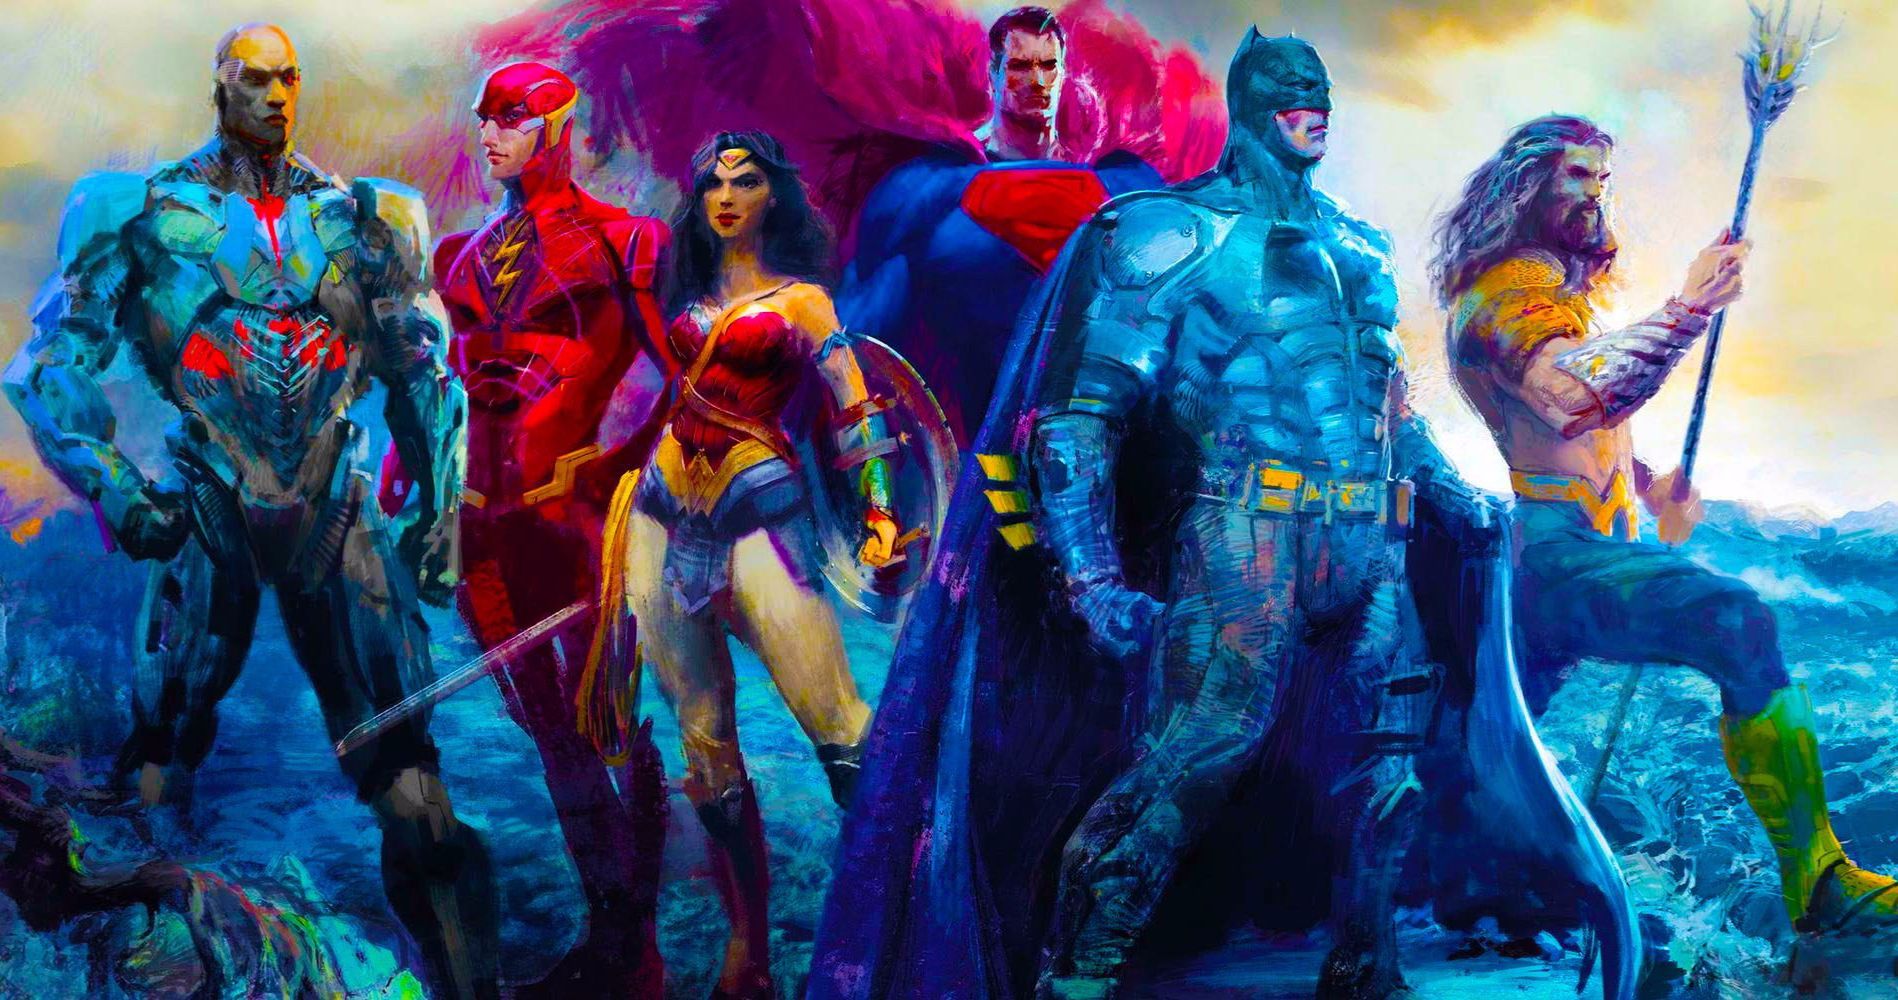 Just How Finished Is the Justice League Snyder Cut?